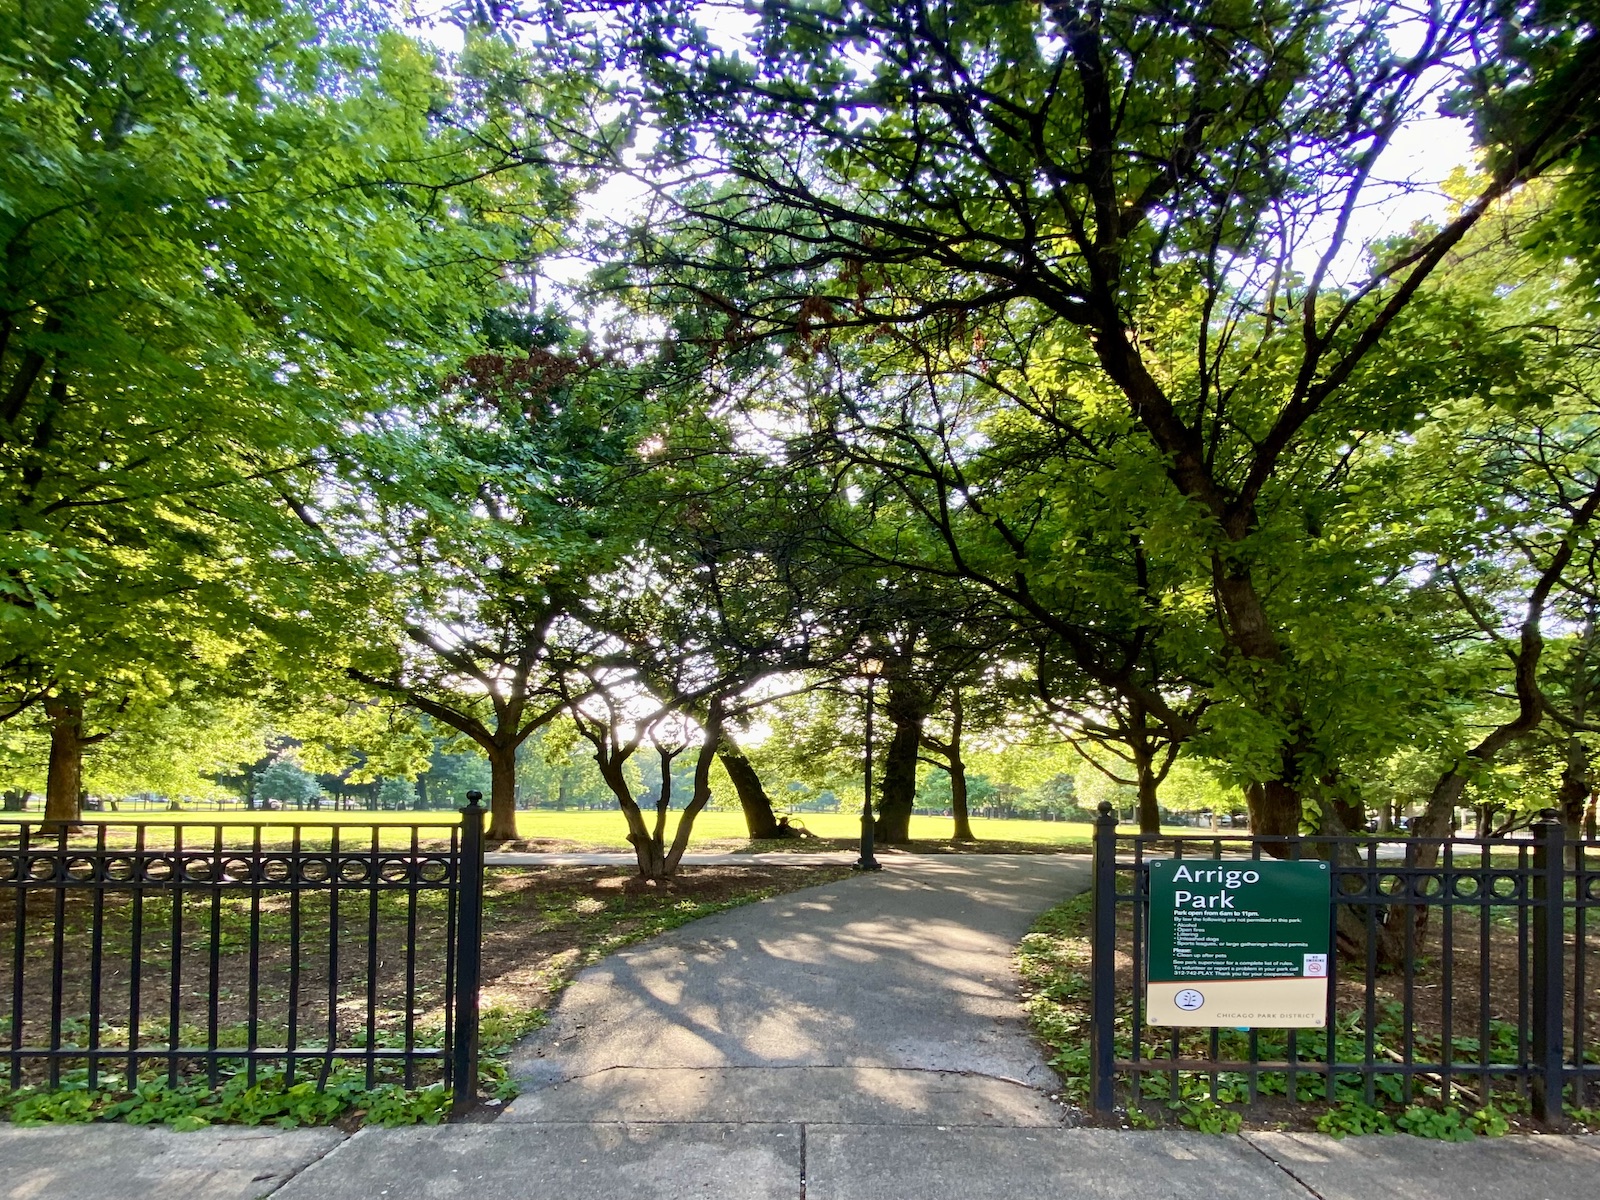 An iron black gate entrance opens to a concrete path that leads visitors through Arrigo Park. The park has grassy fields and trees.